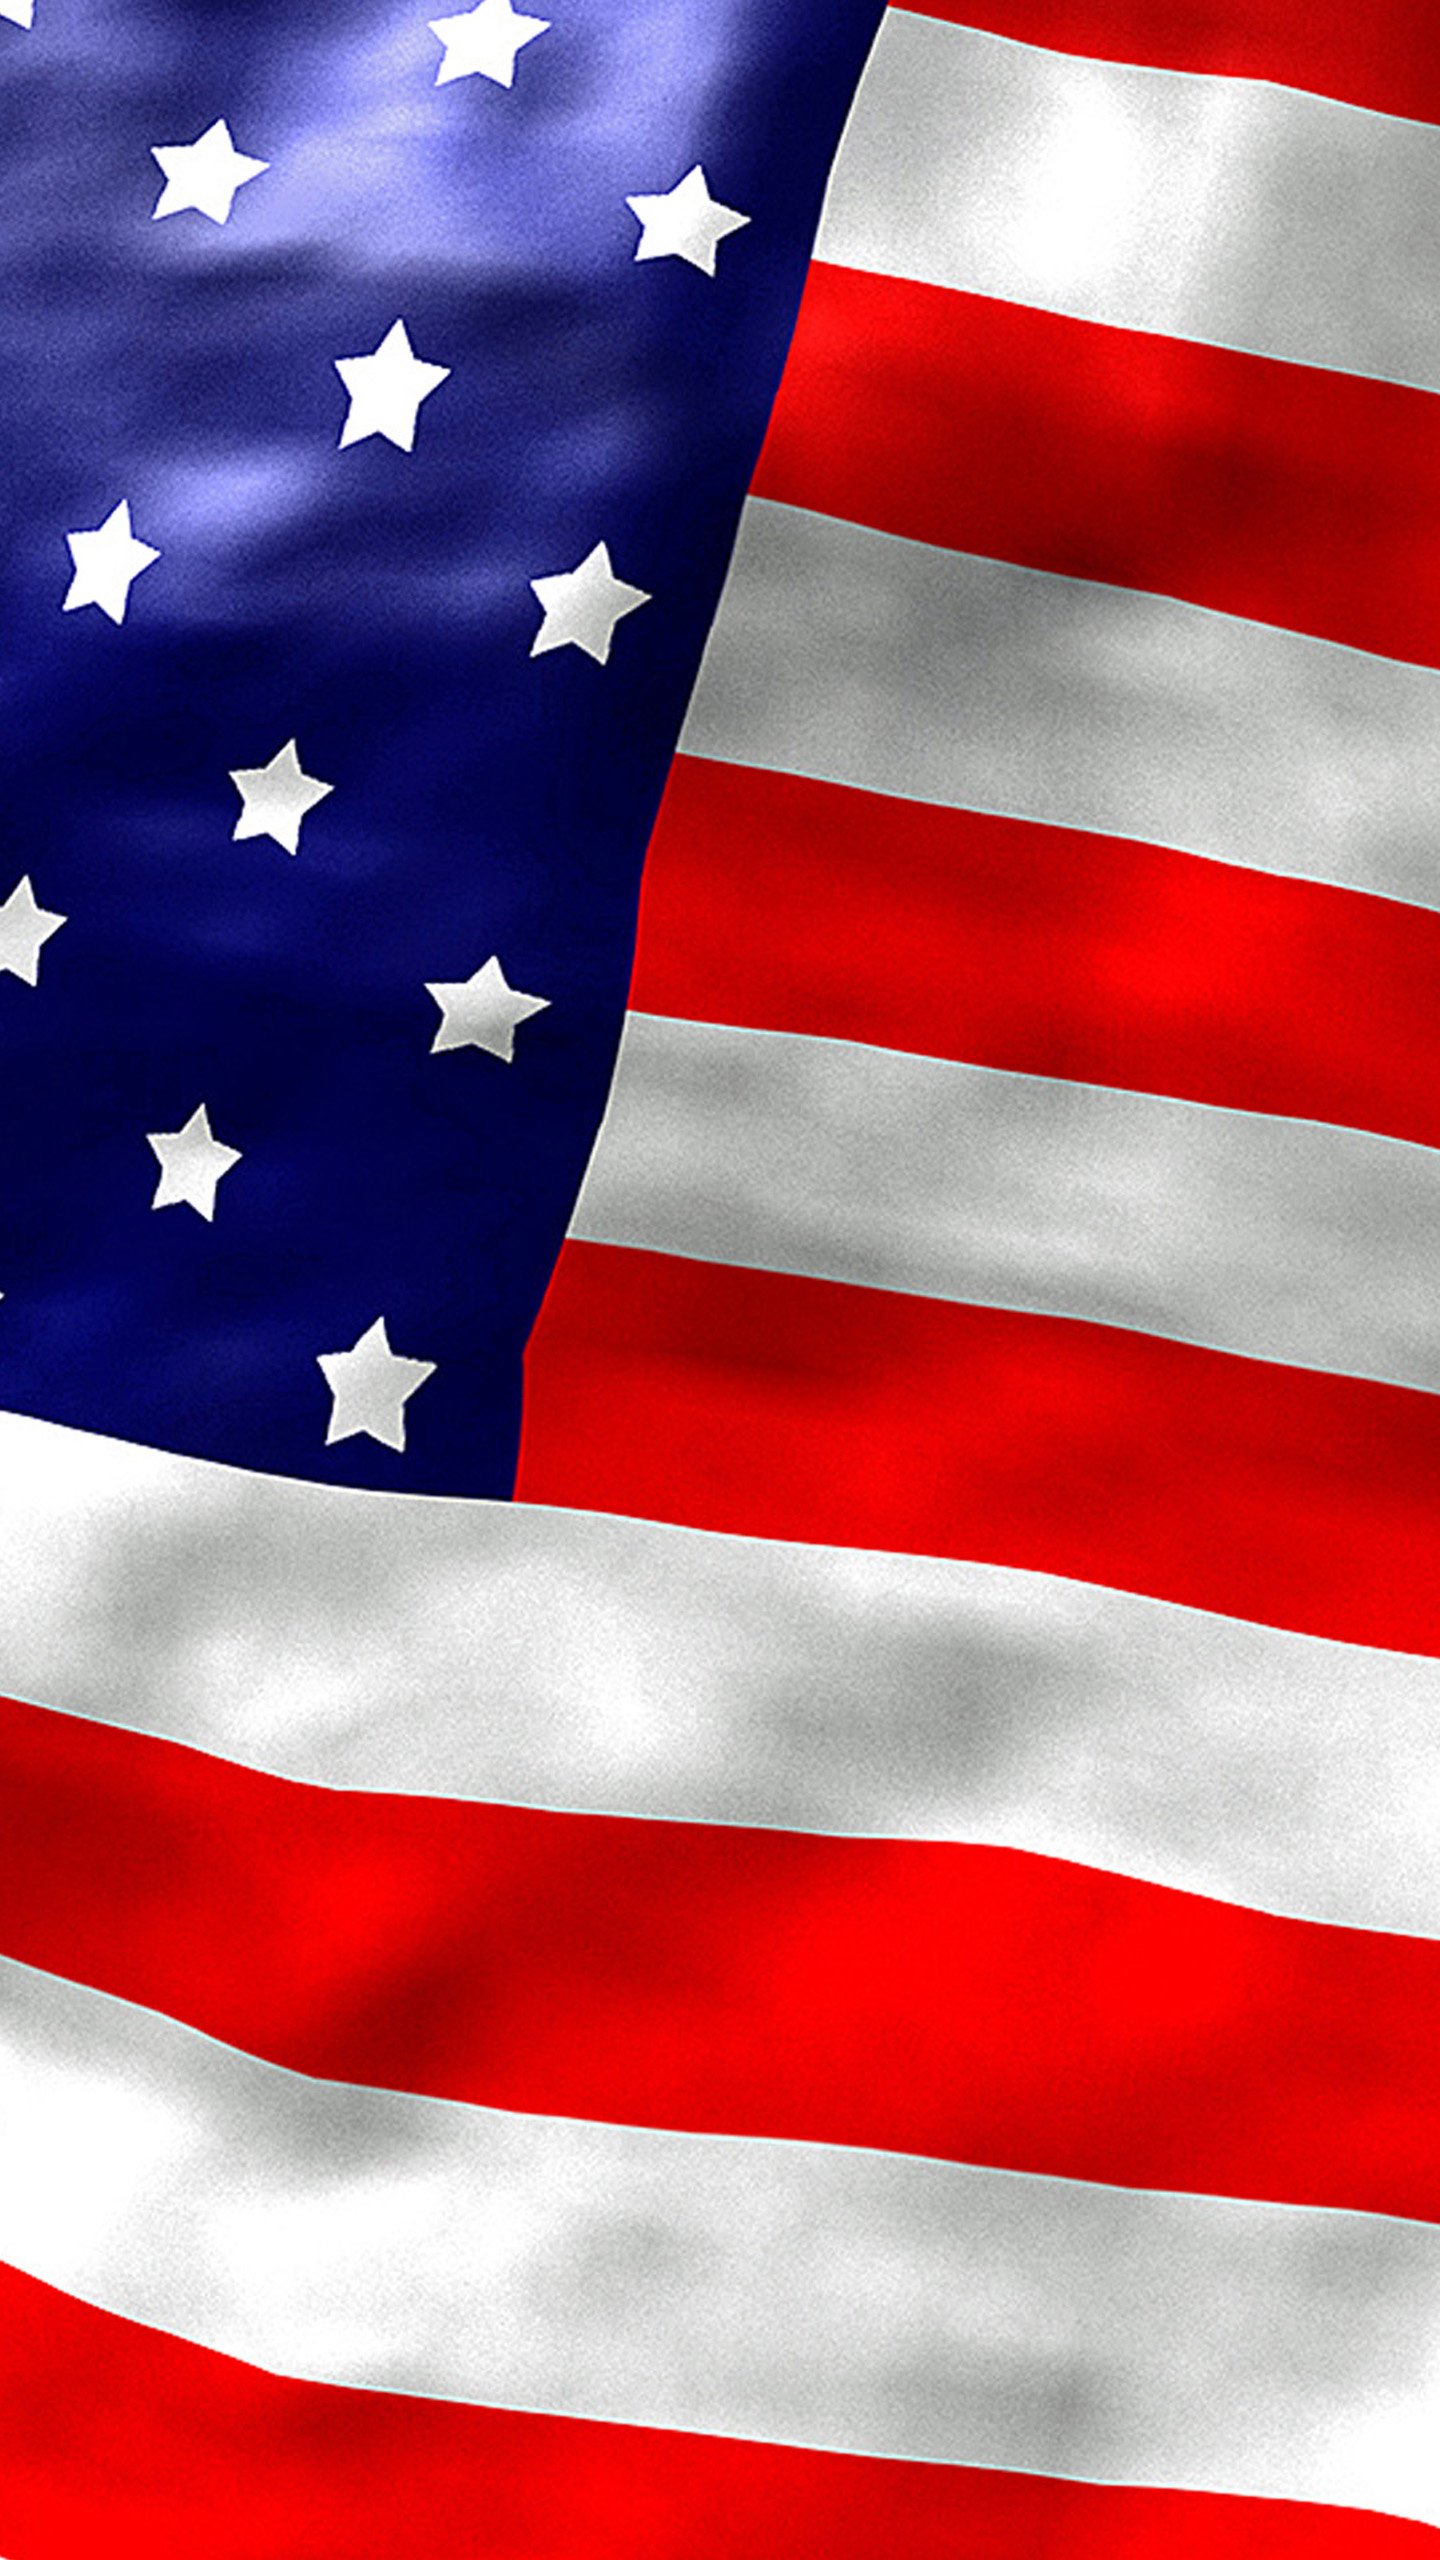 American Flag 2 Galaxy Note 4 Wallpapers